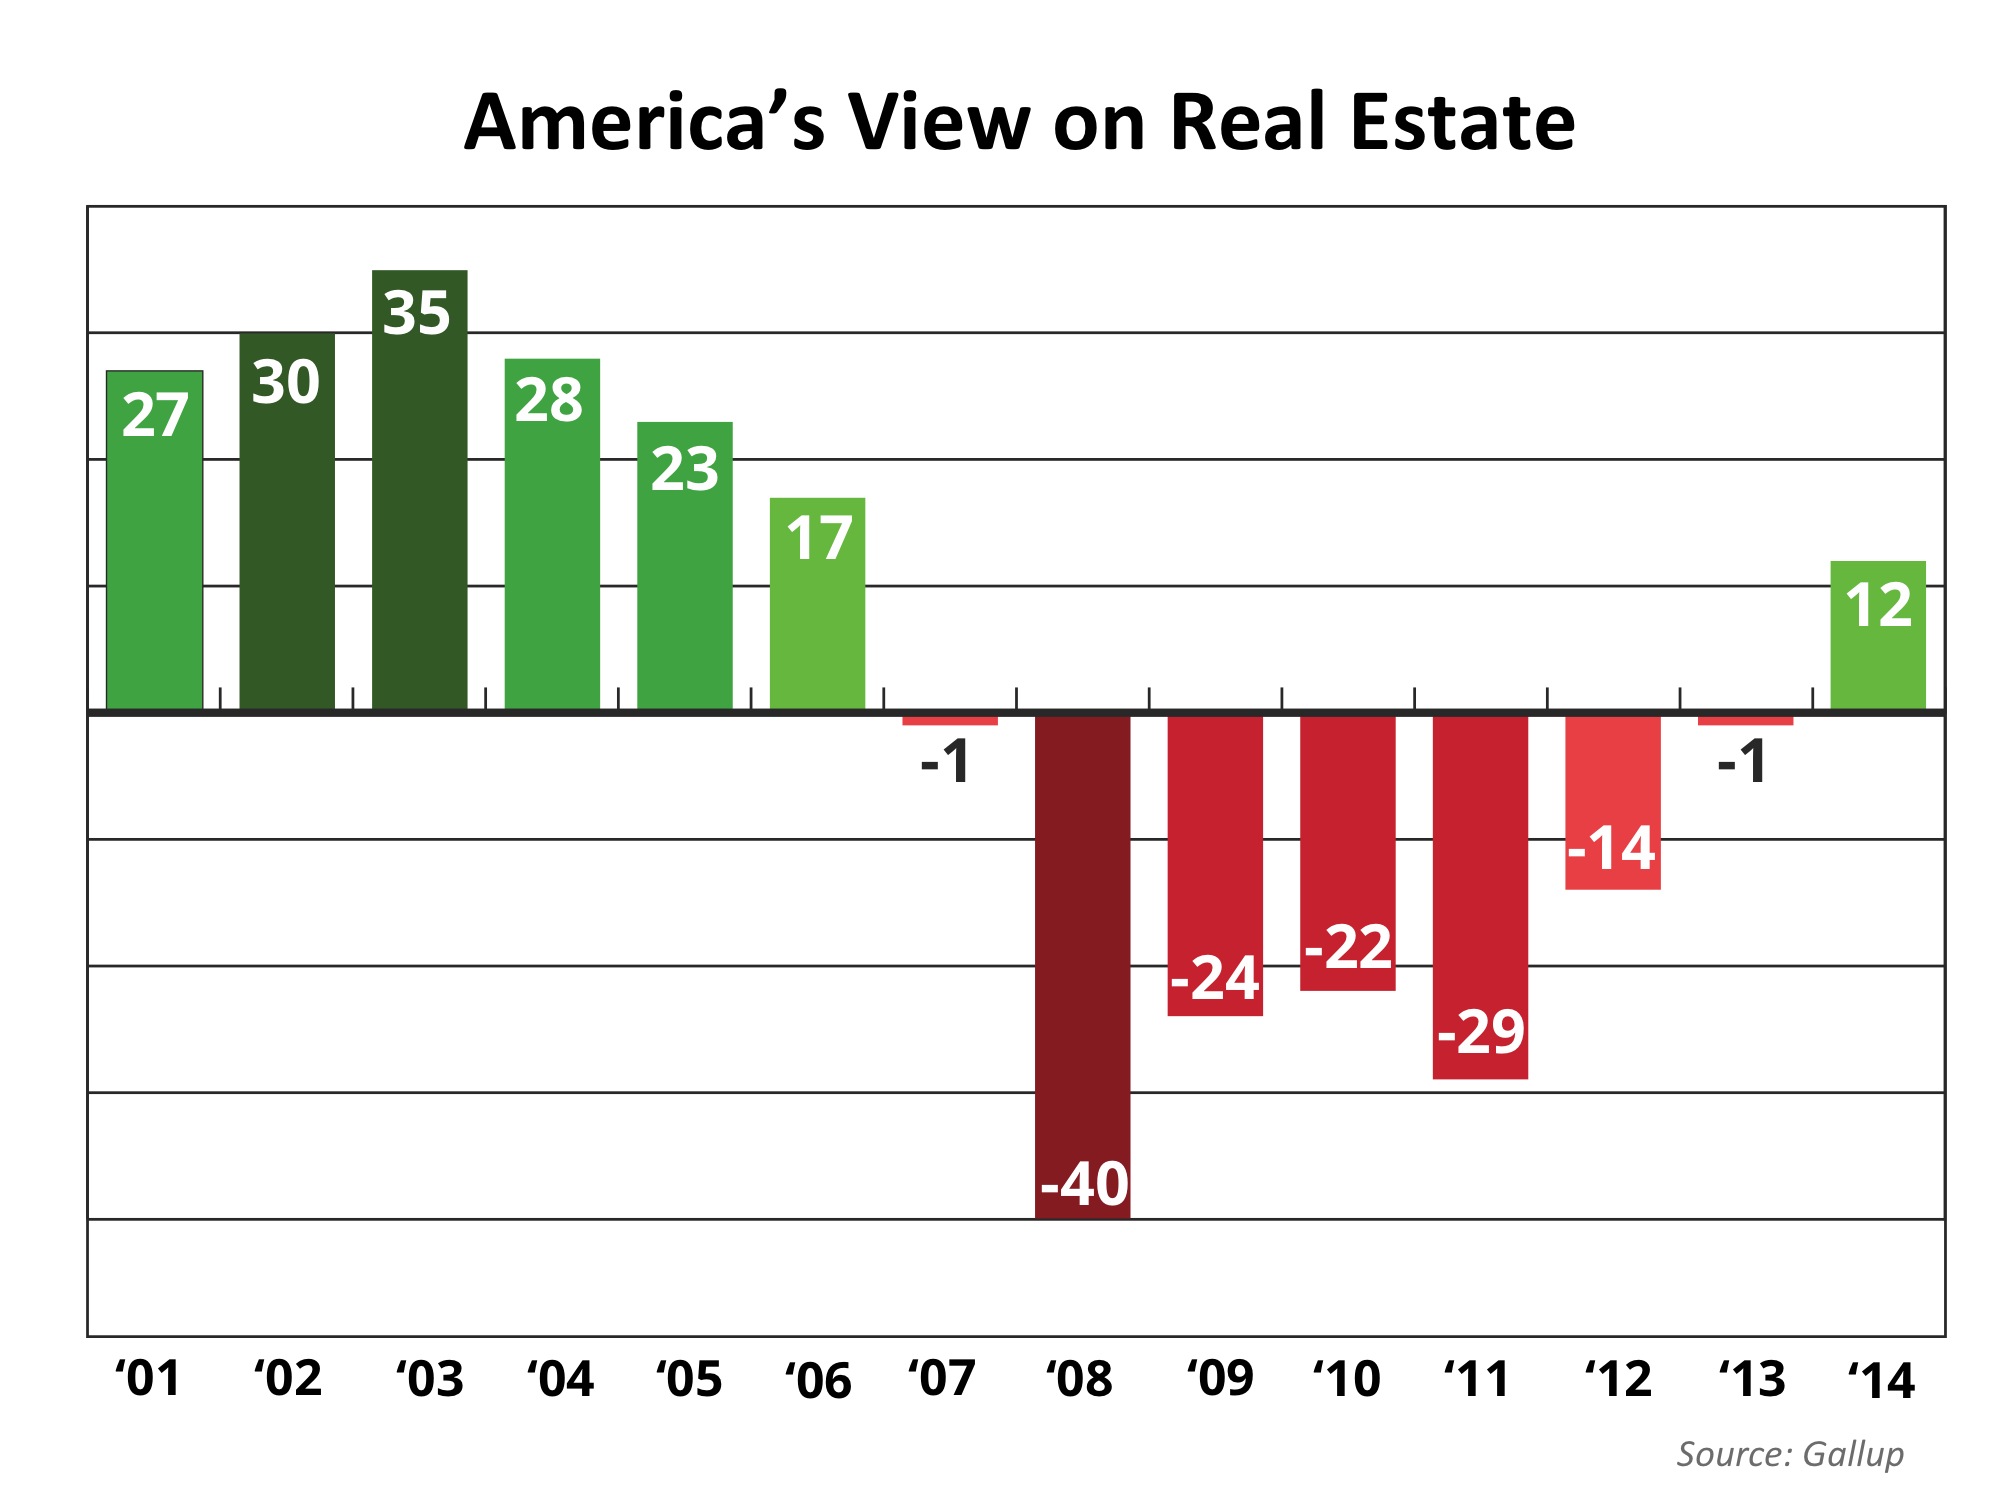 Real Estate “Heading in the Right Direction” | Keeping Current Matters